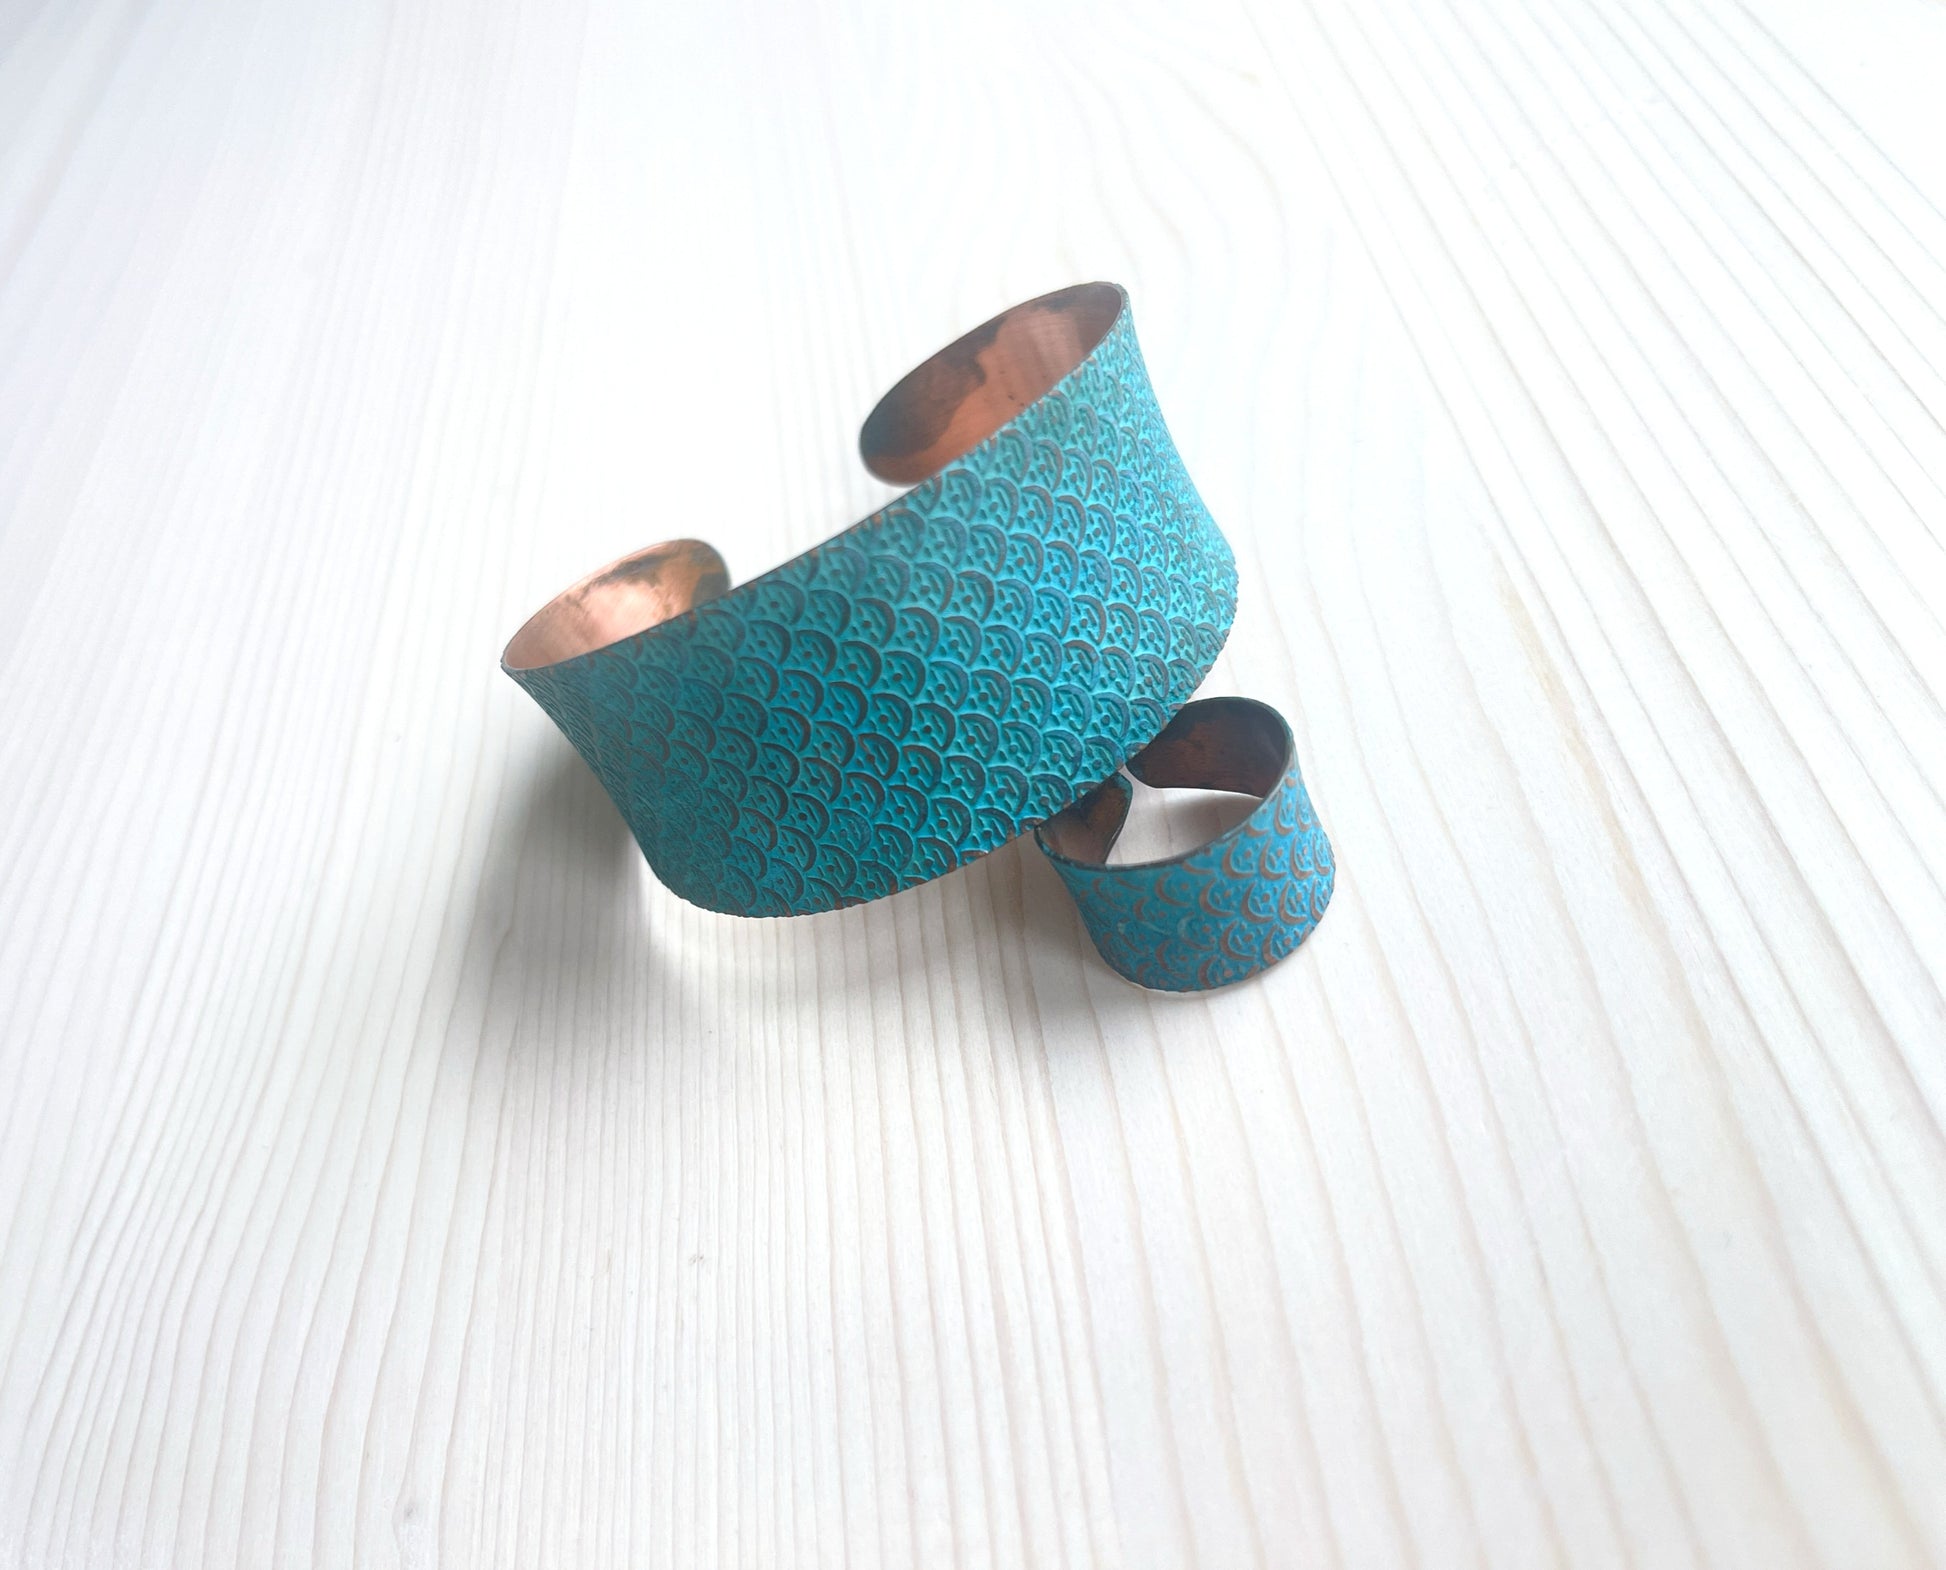 Handmade copper bracelet and ring designed with a textured rich turquoise patina